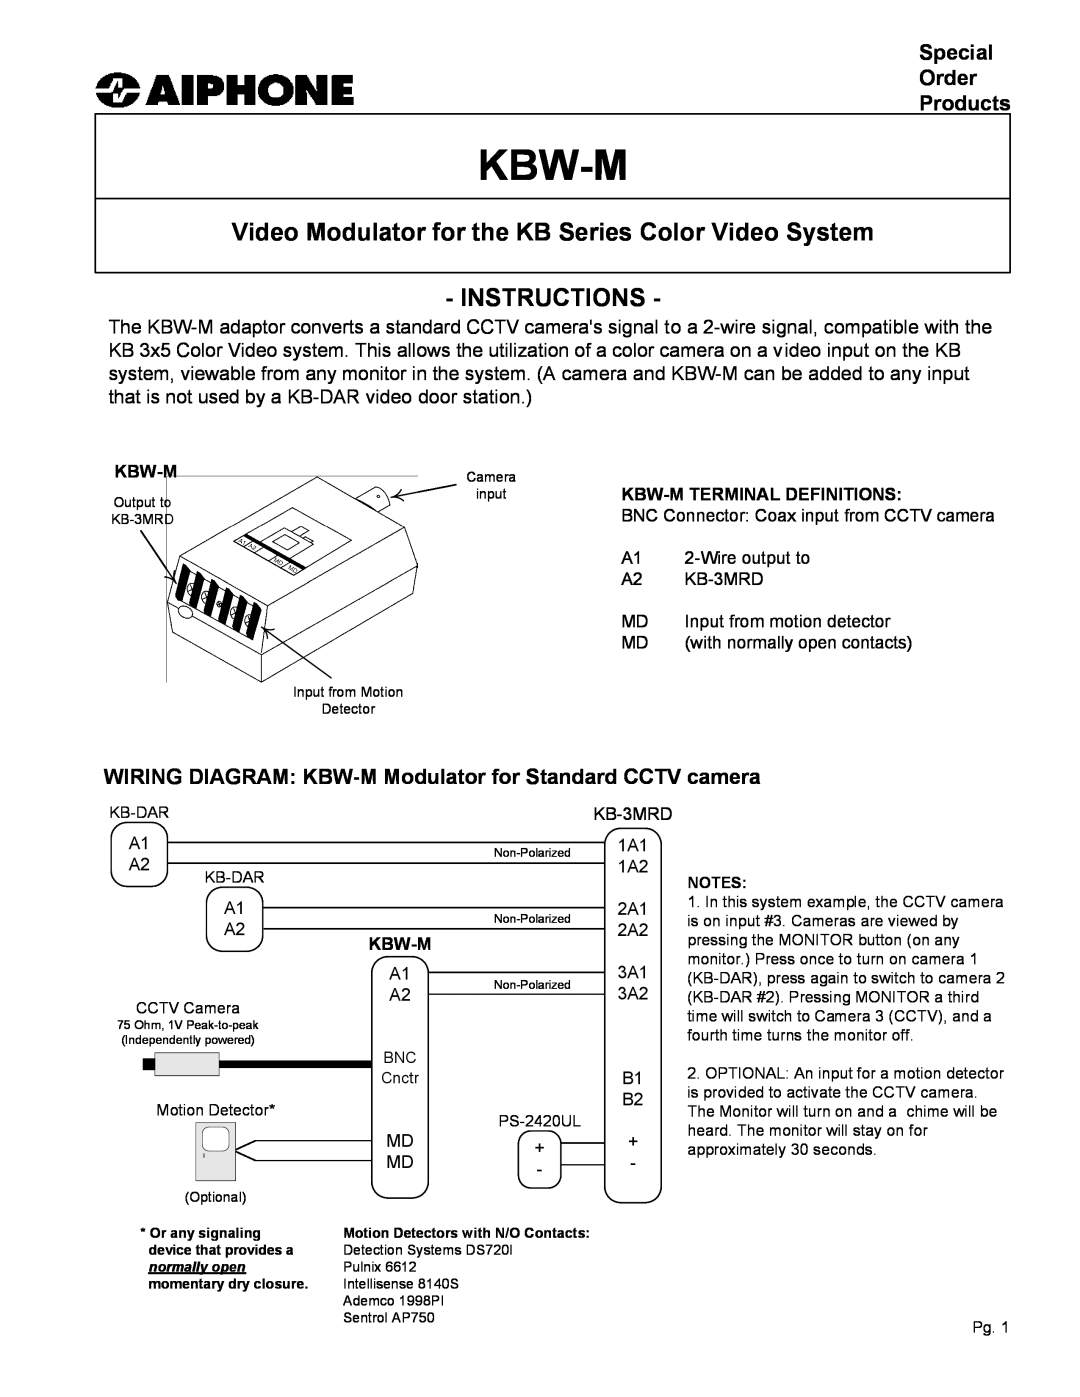 Aiphone manual Special Order Products, WIRING DIAGRAM KBW-M Modulator for Standard CCTV camera, Kbw-M 